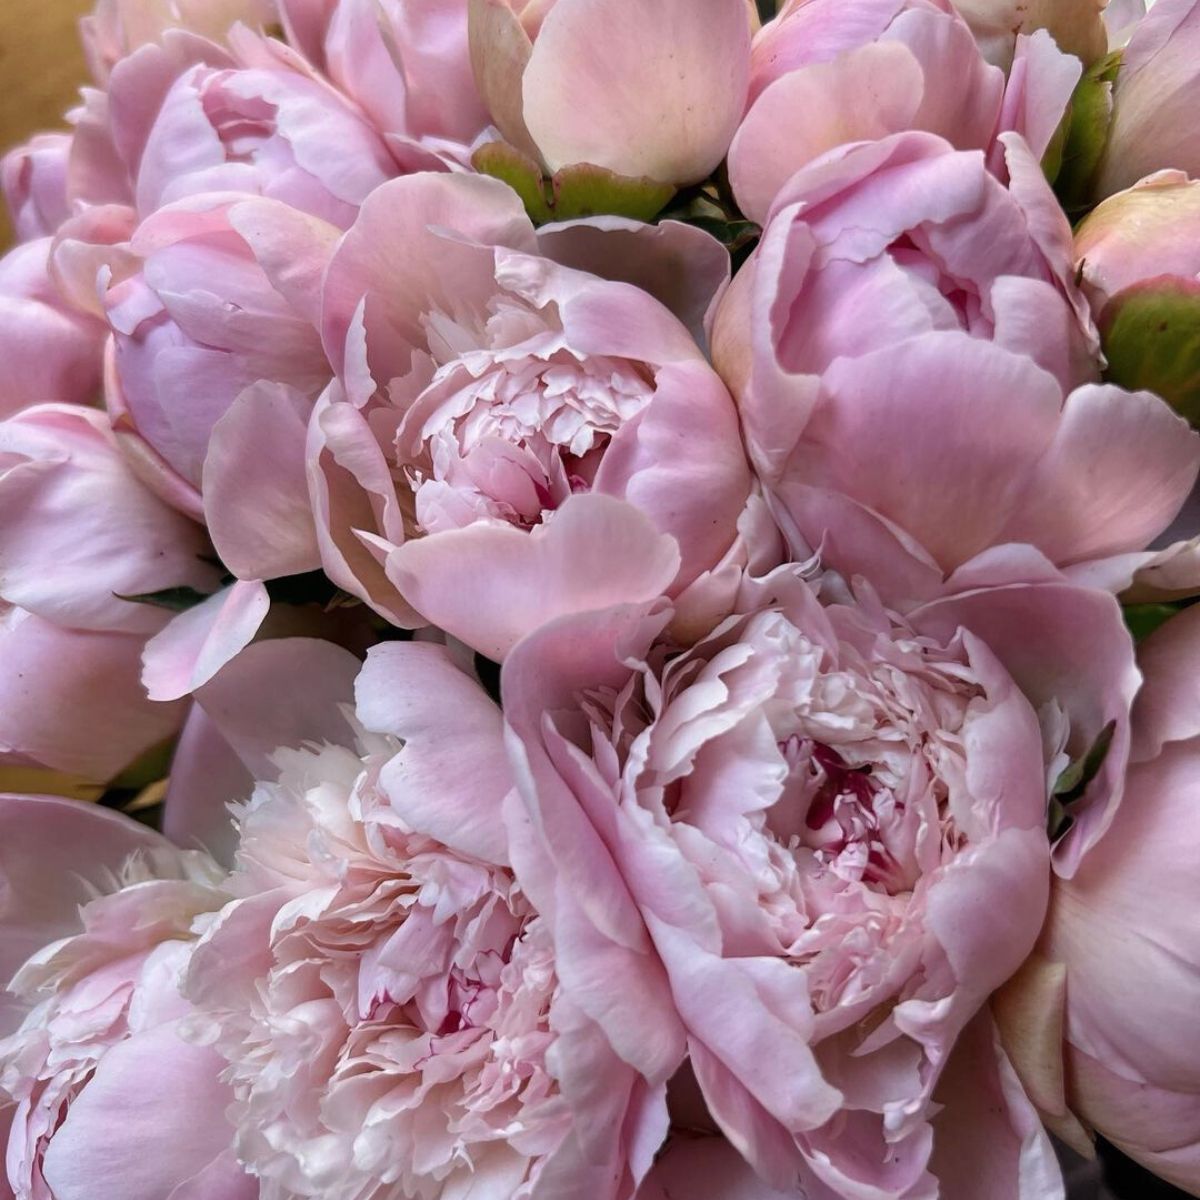 The allure of peonies